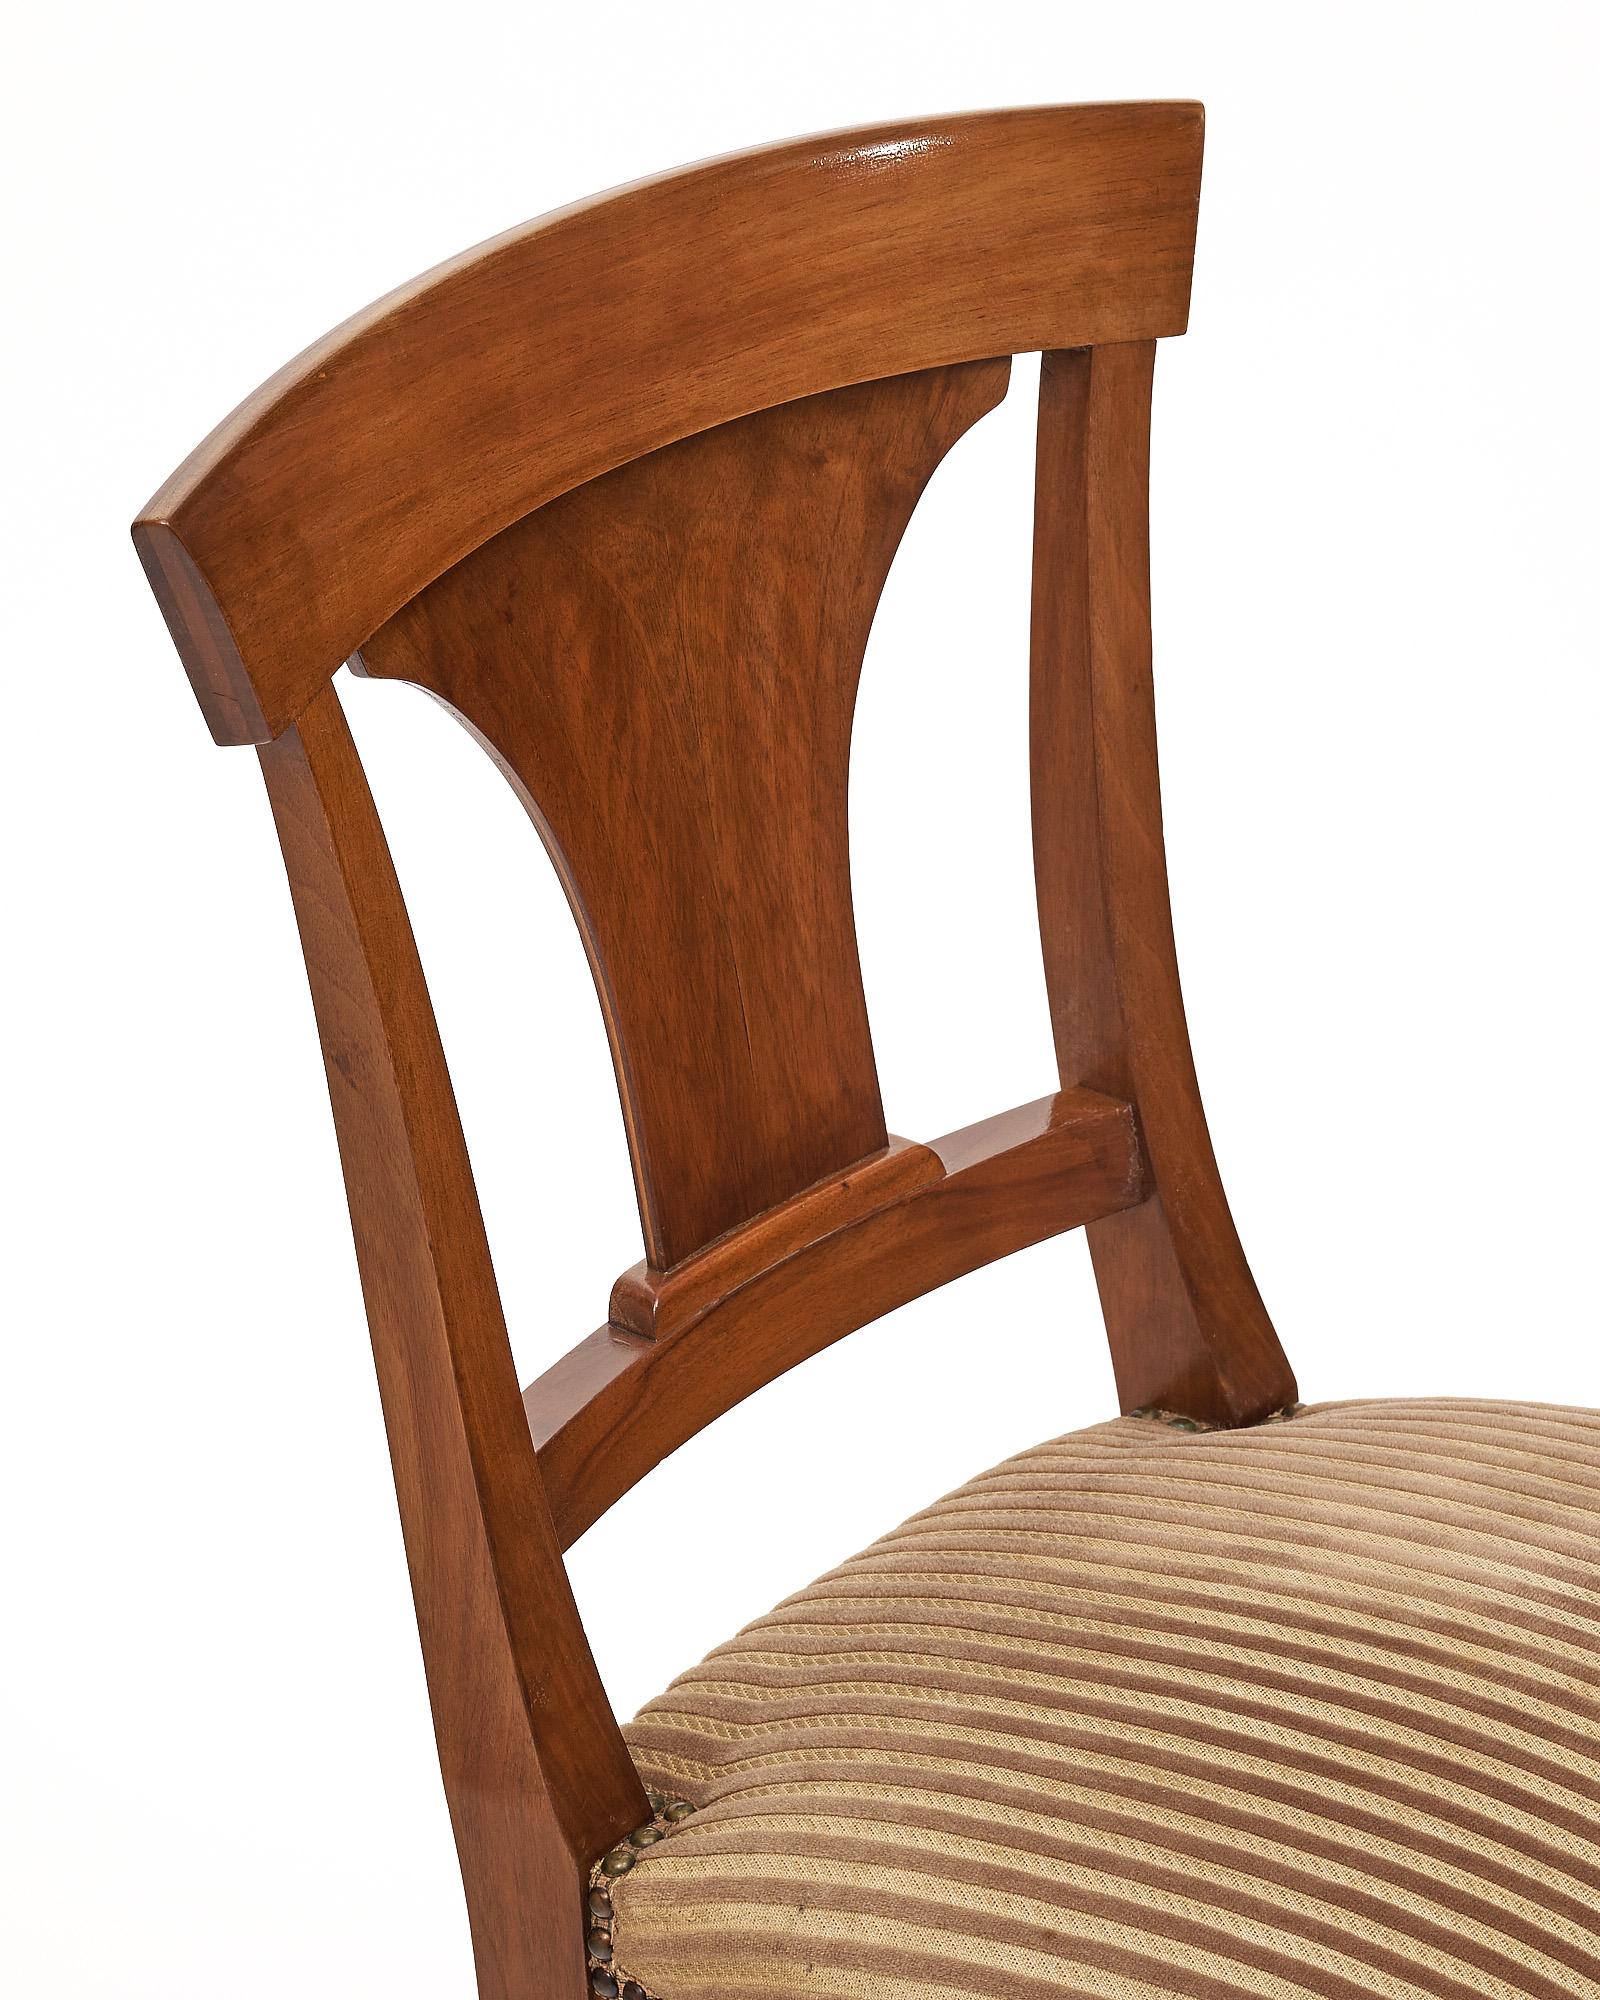 Upholstery Art Deco Period French Dining Chairs For Sale